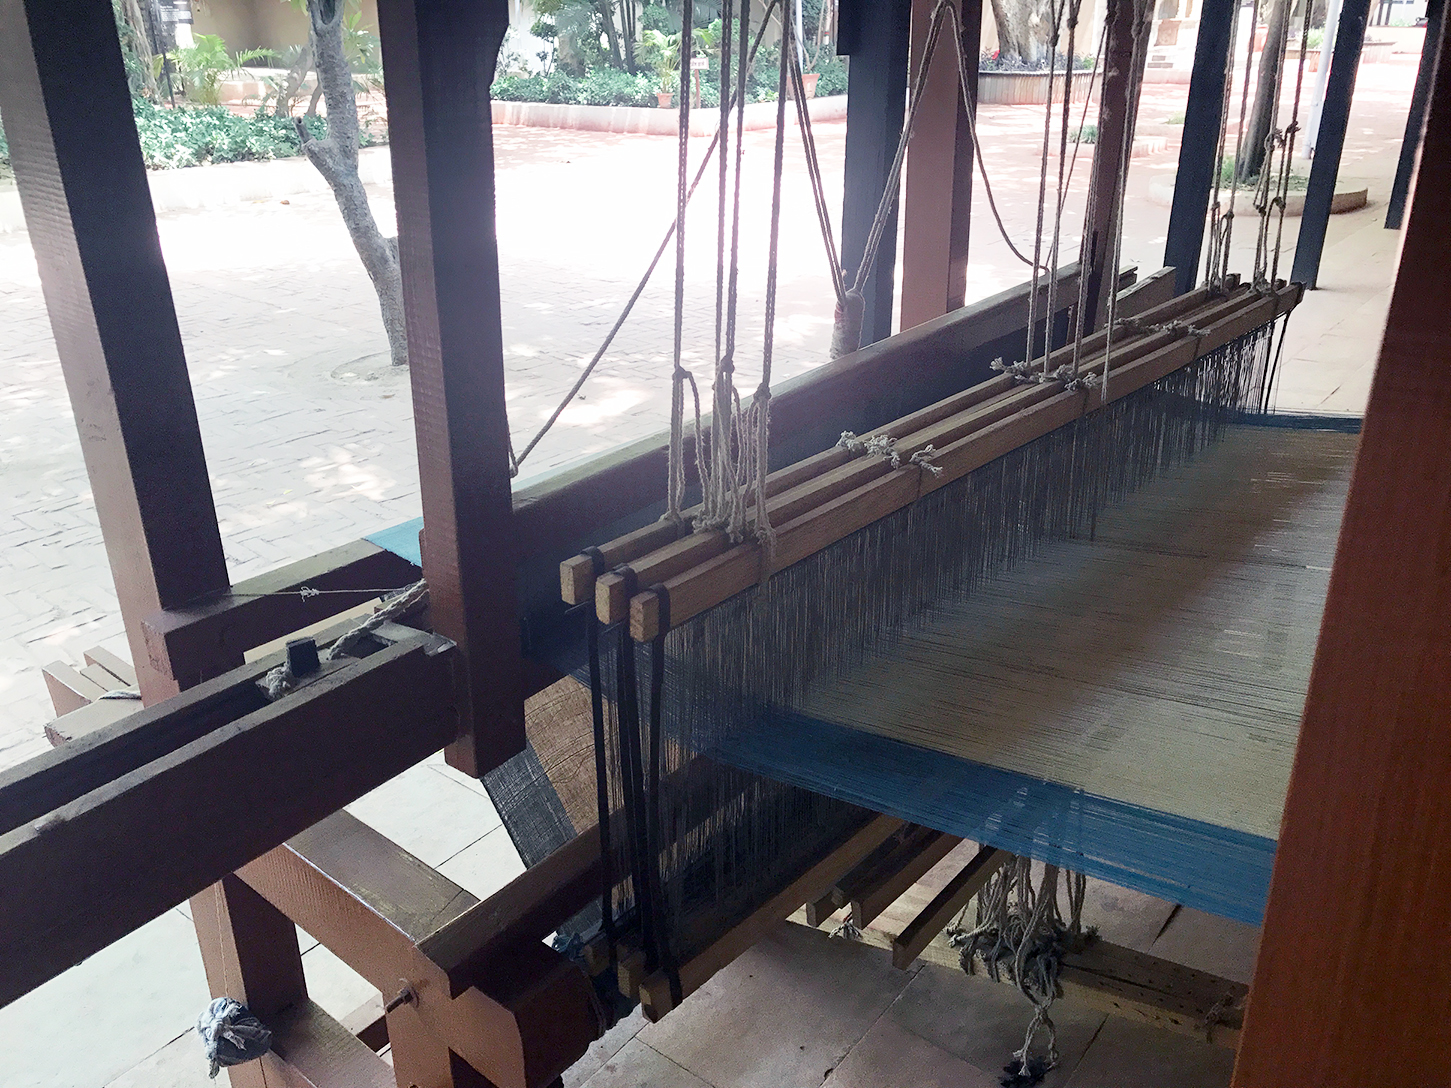 Wooden Handloom for production of rugs